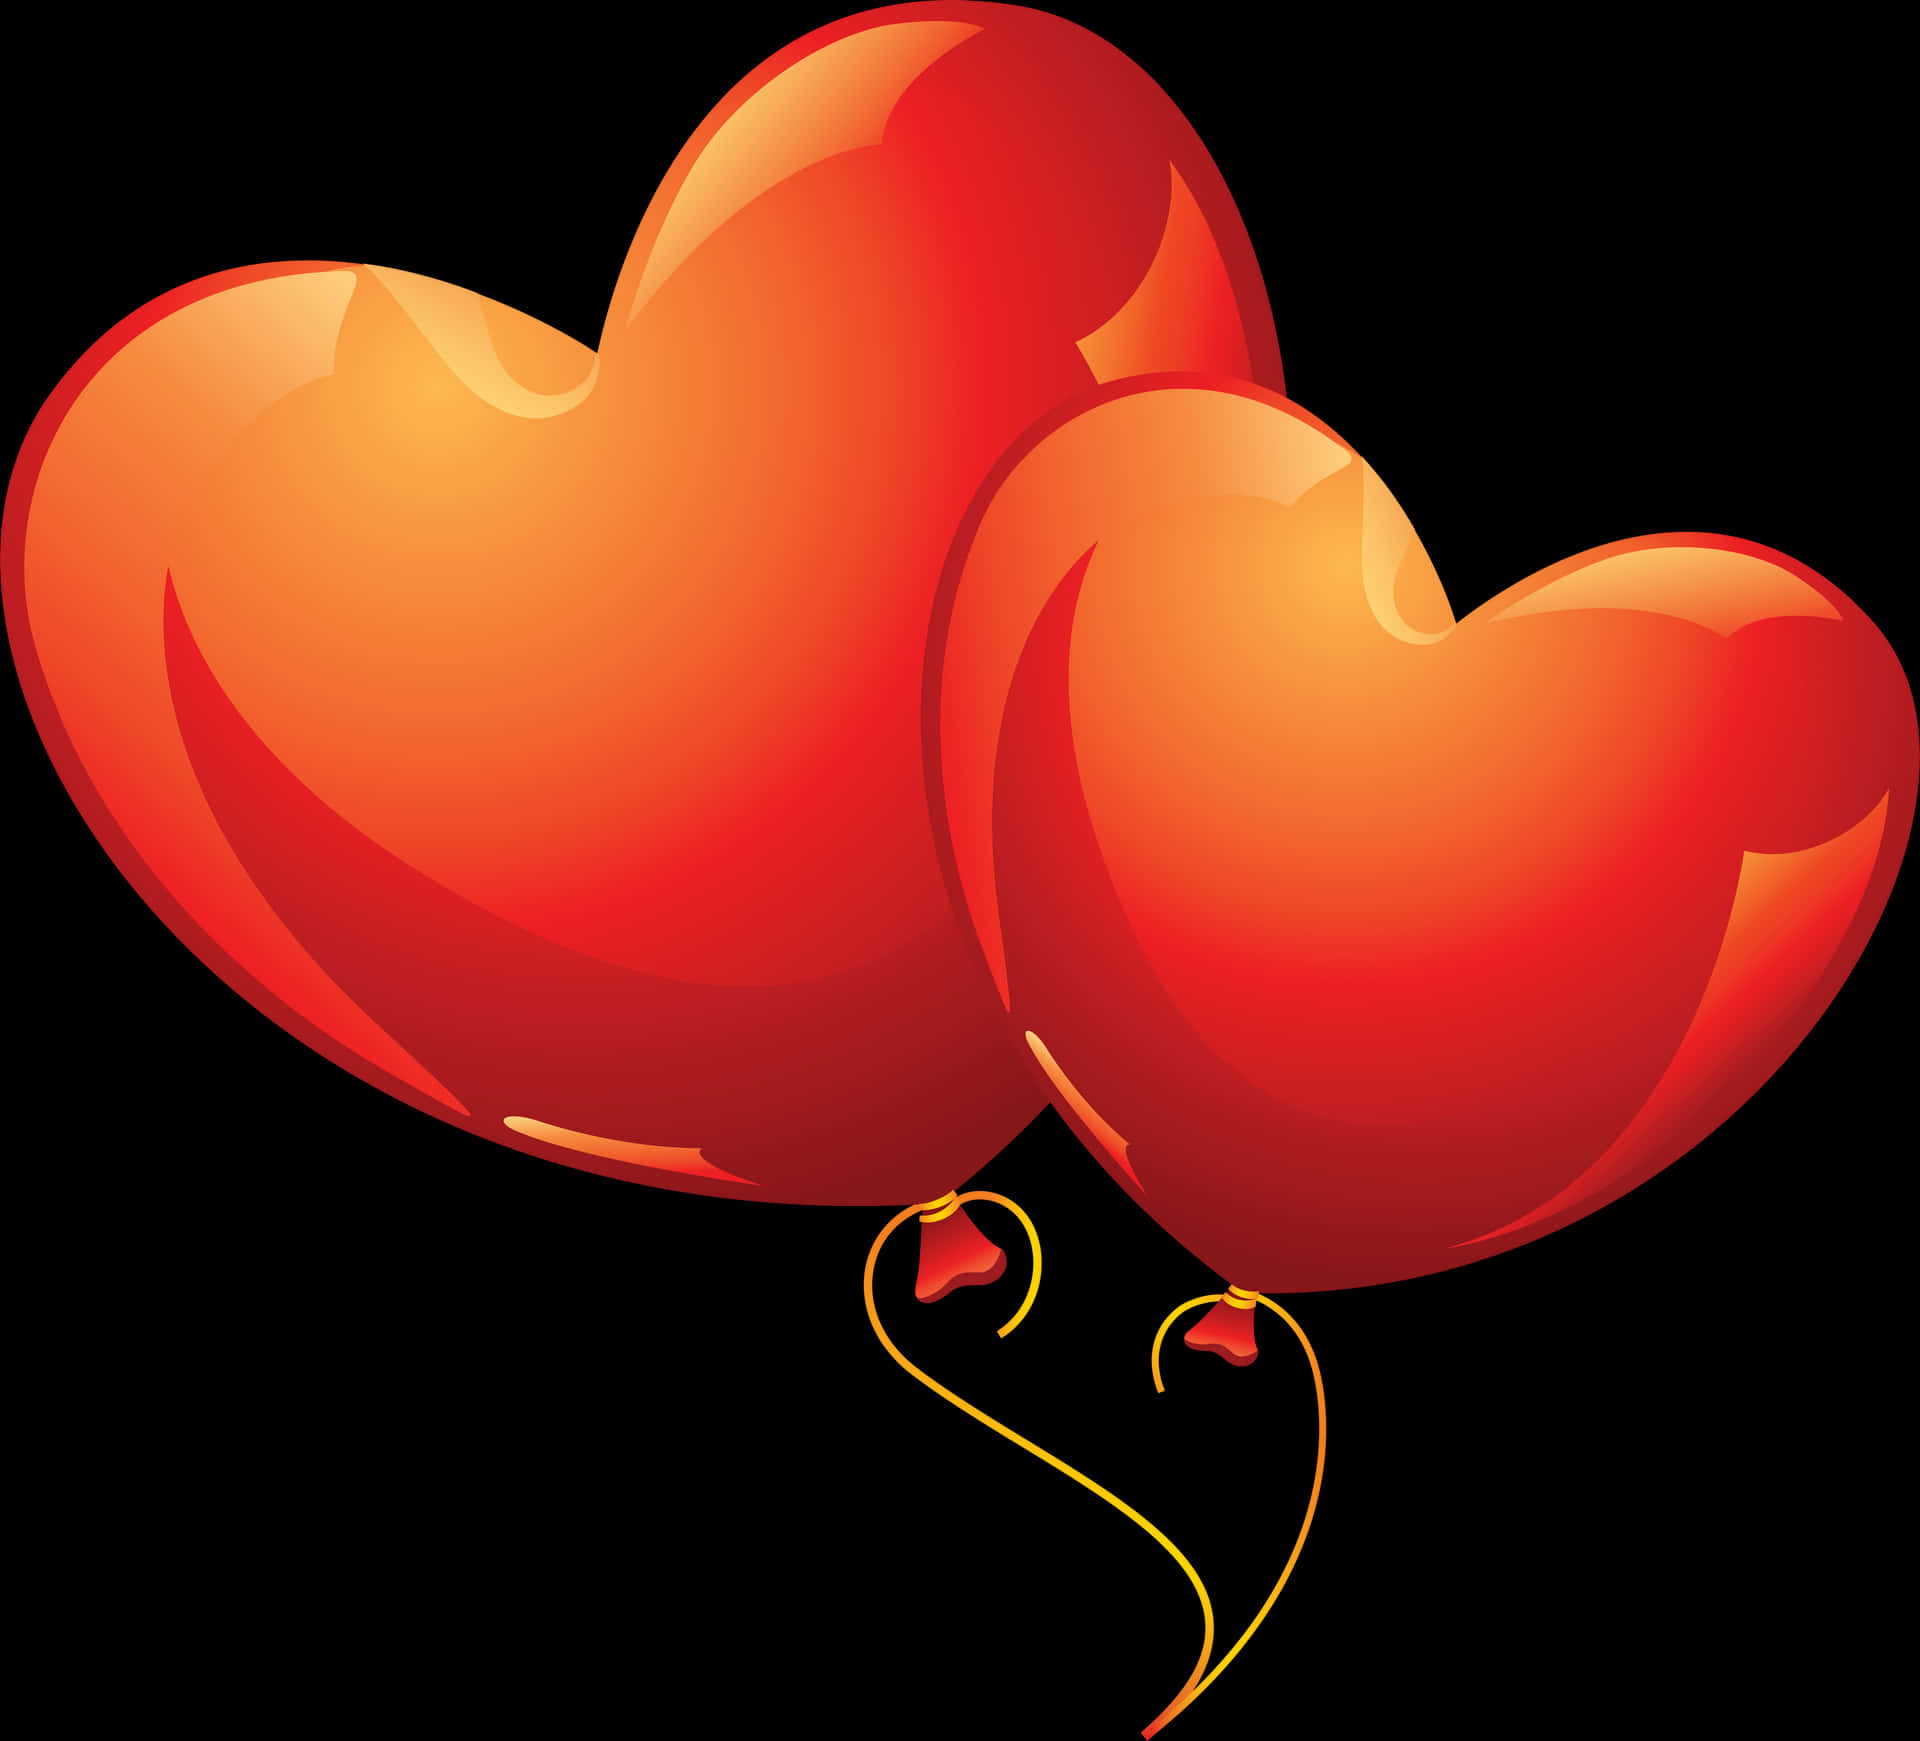 Two Heart Balloons Illustration PNG